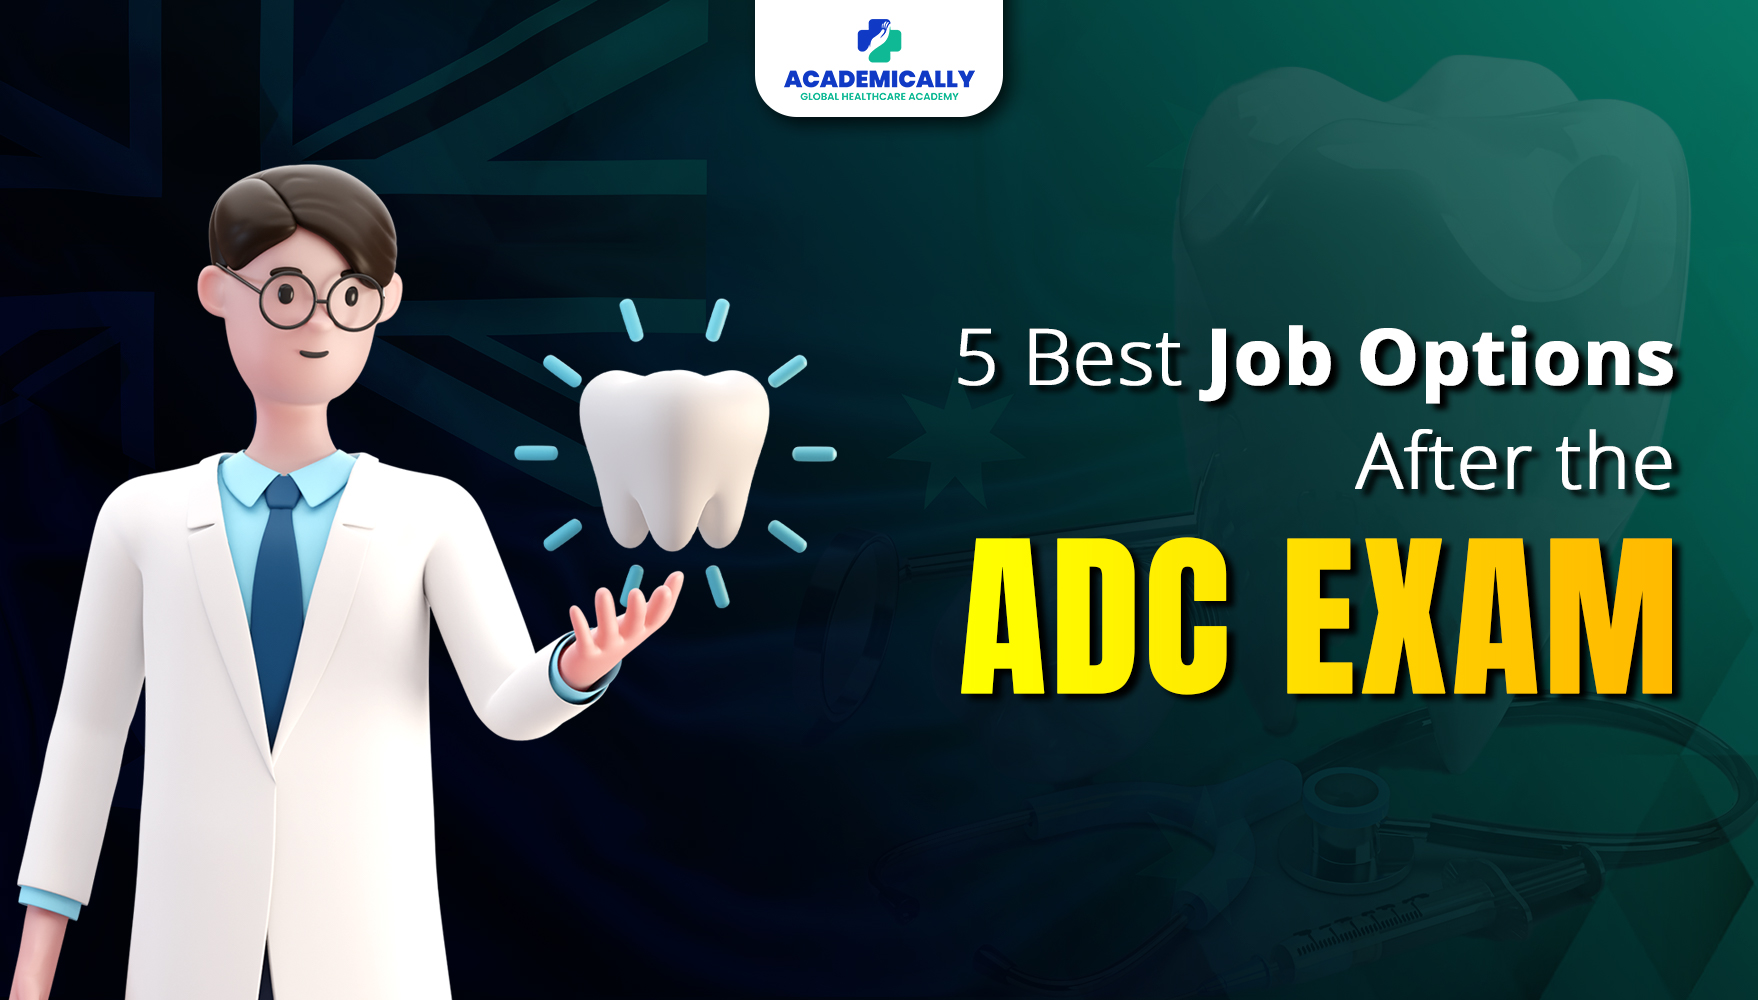 Blog about the best job options after clearing ADC.